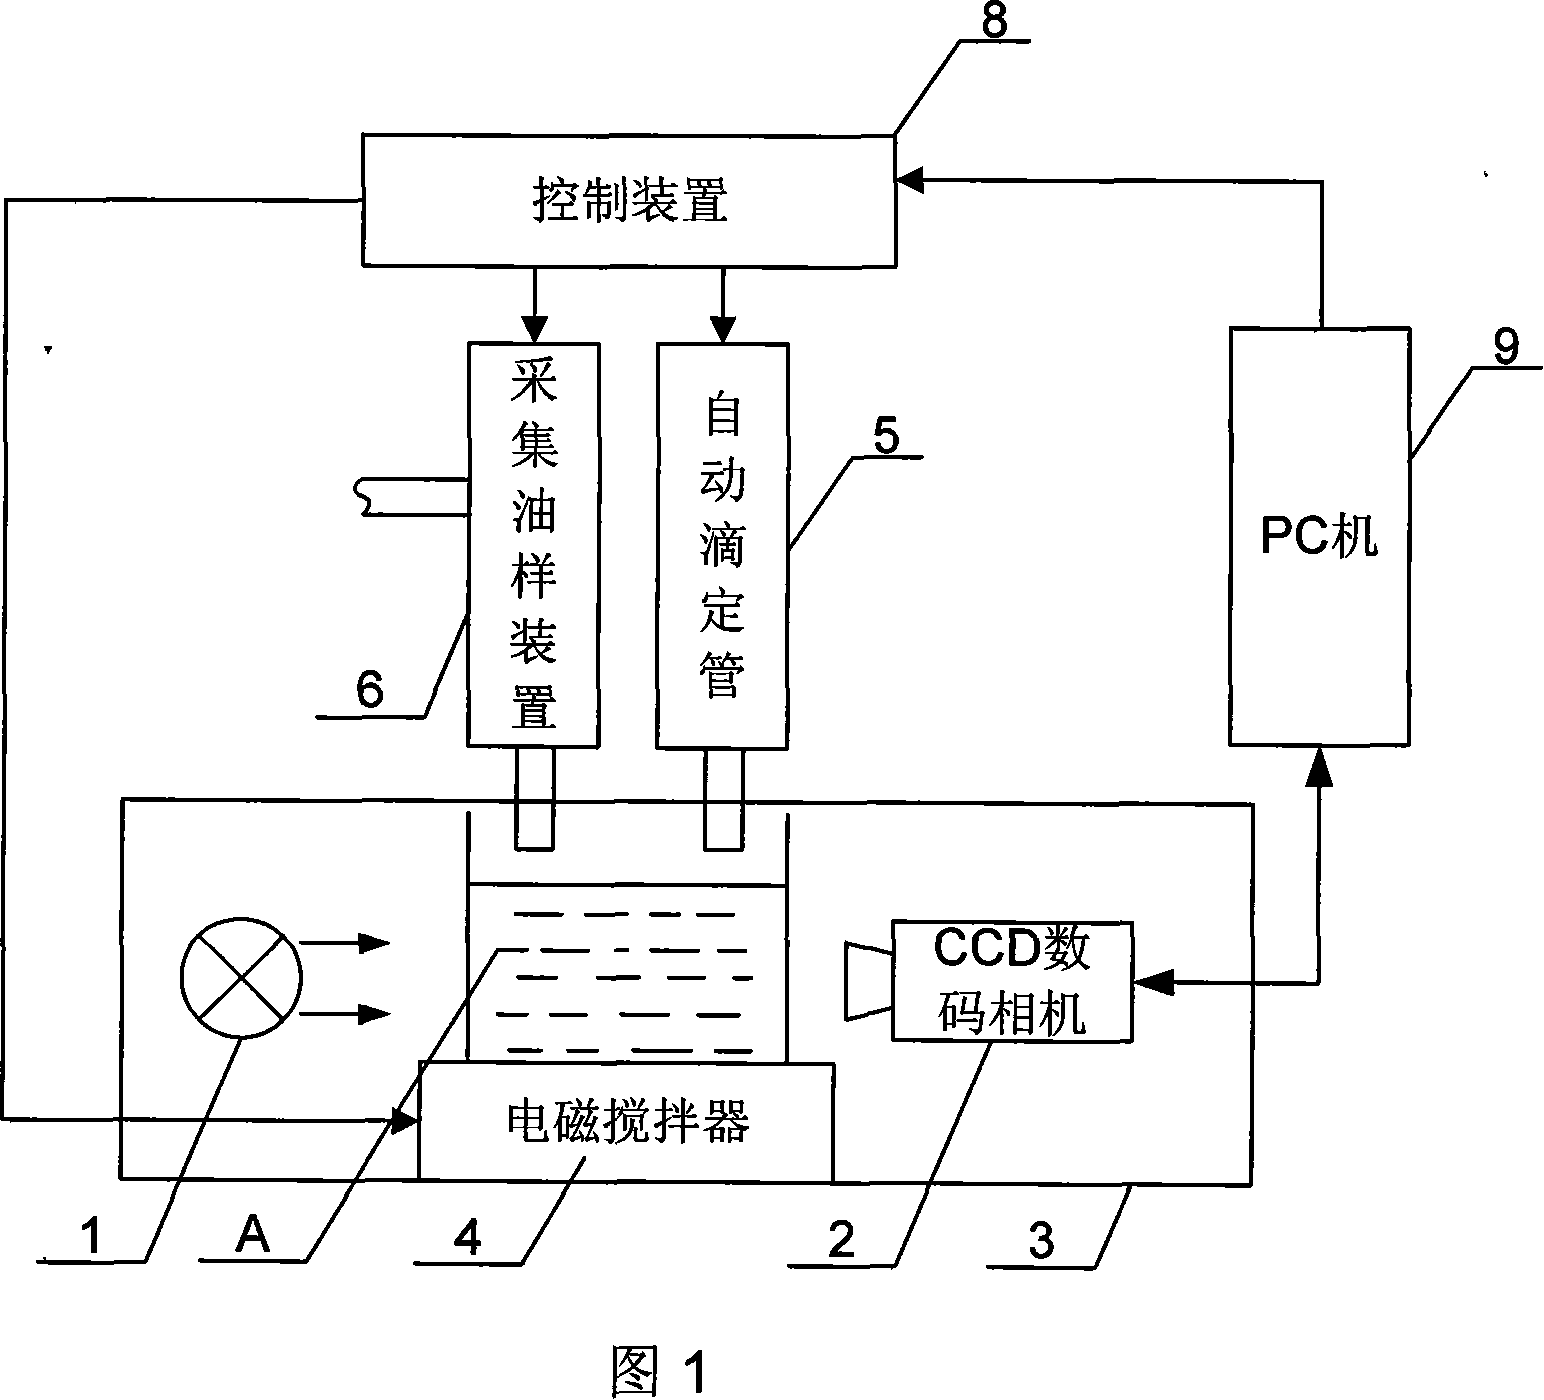 Grease color acid value integral automatic detection device and method based on computer vision